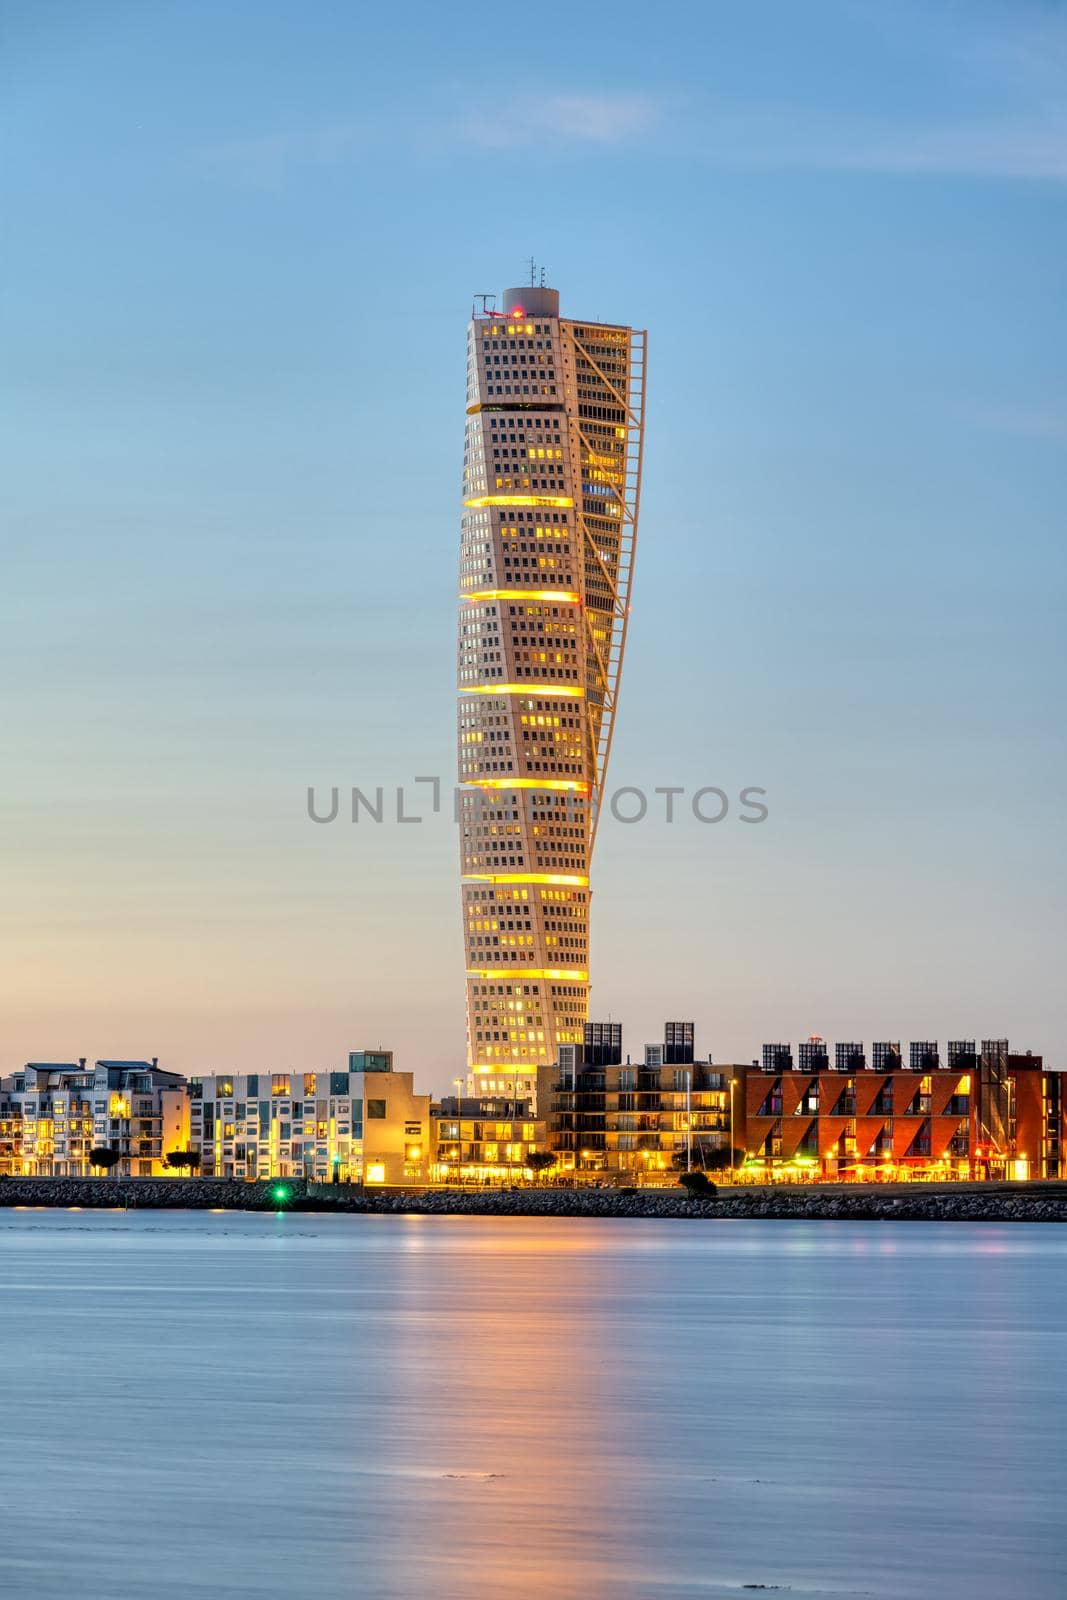 The iconic Turning Torso in in Malmo, Sweden, after sunset